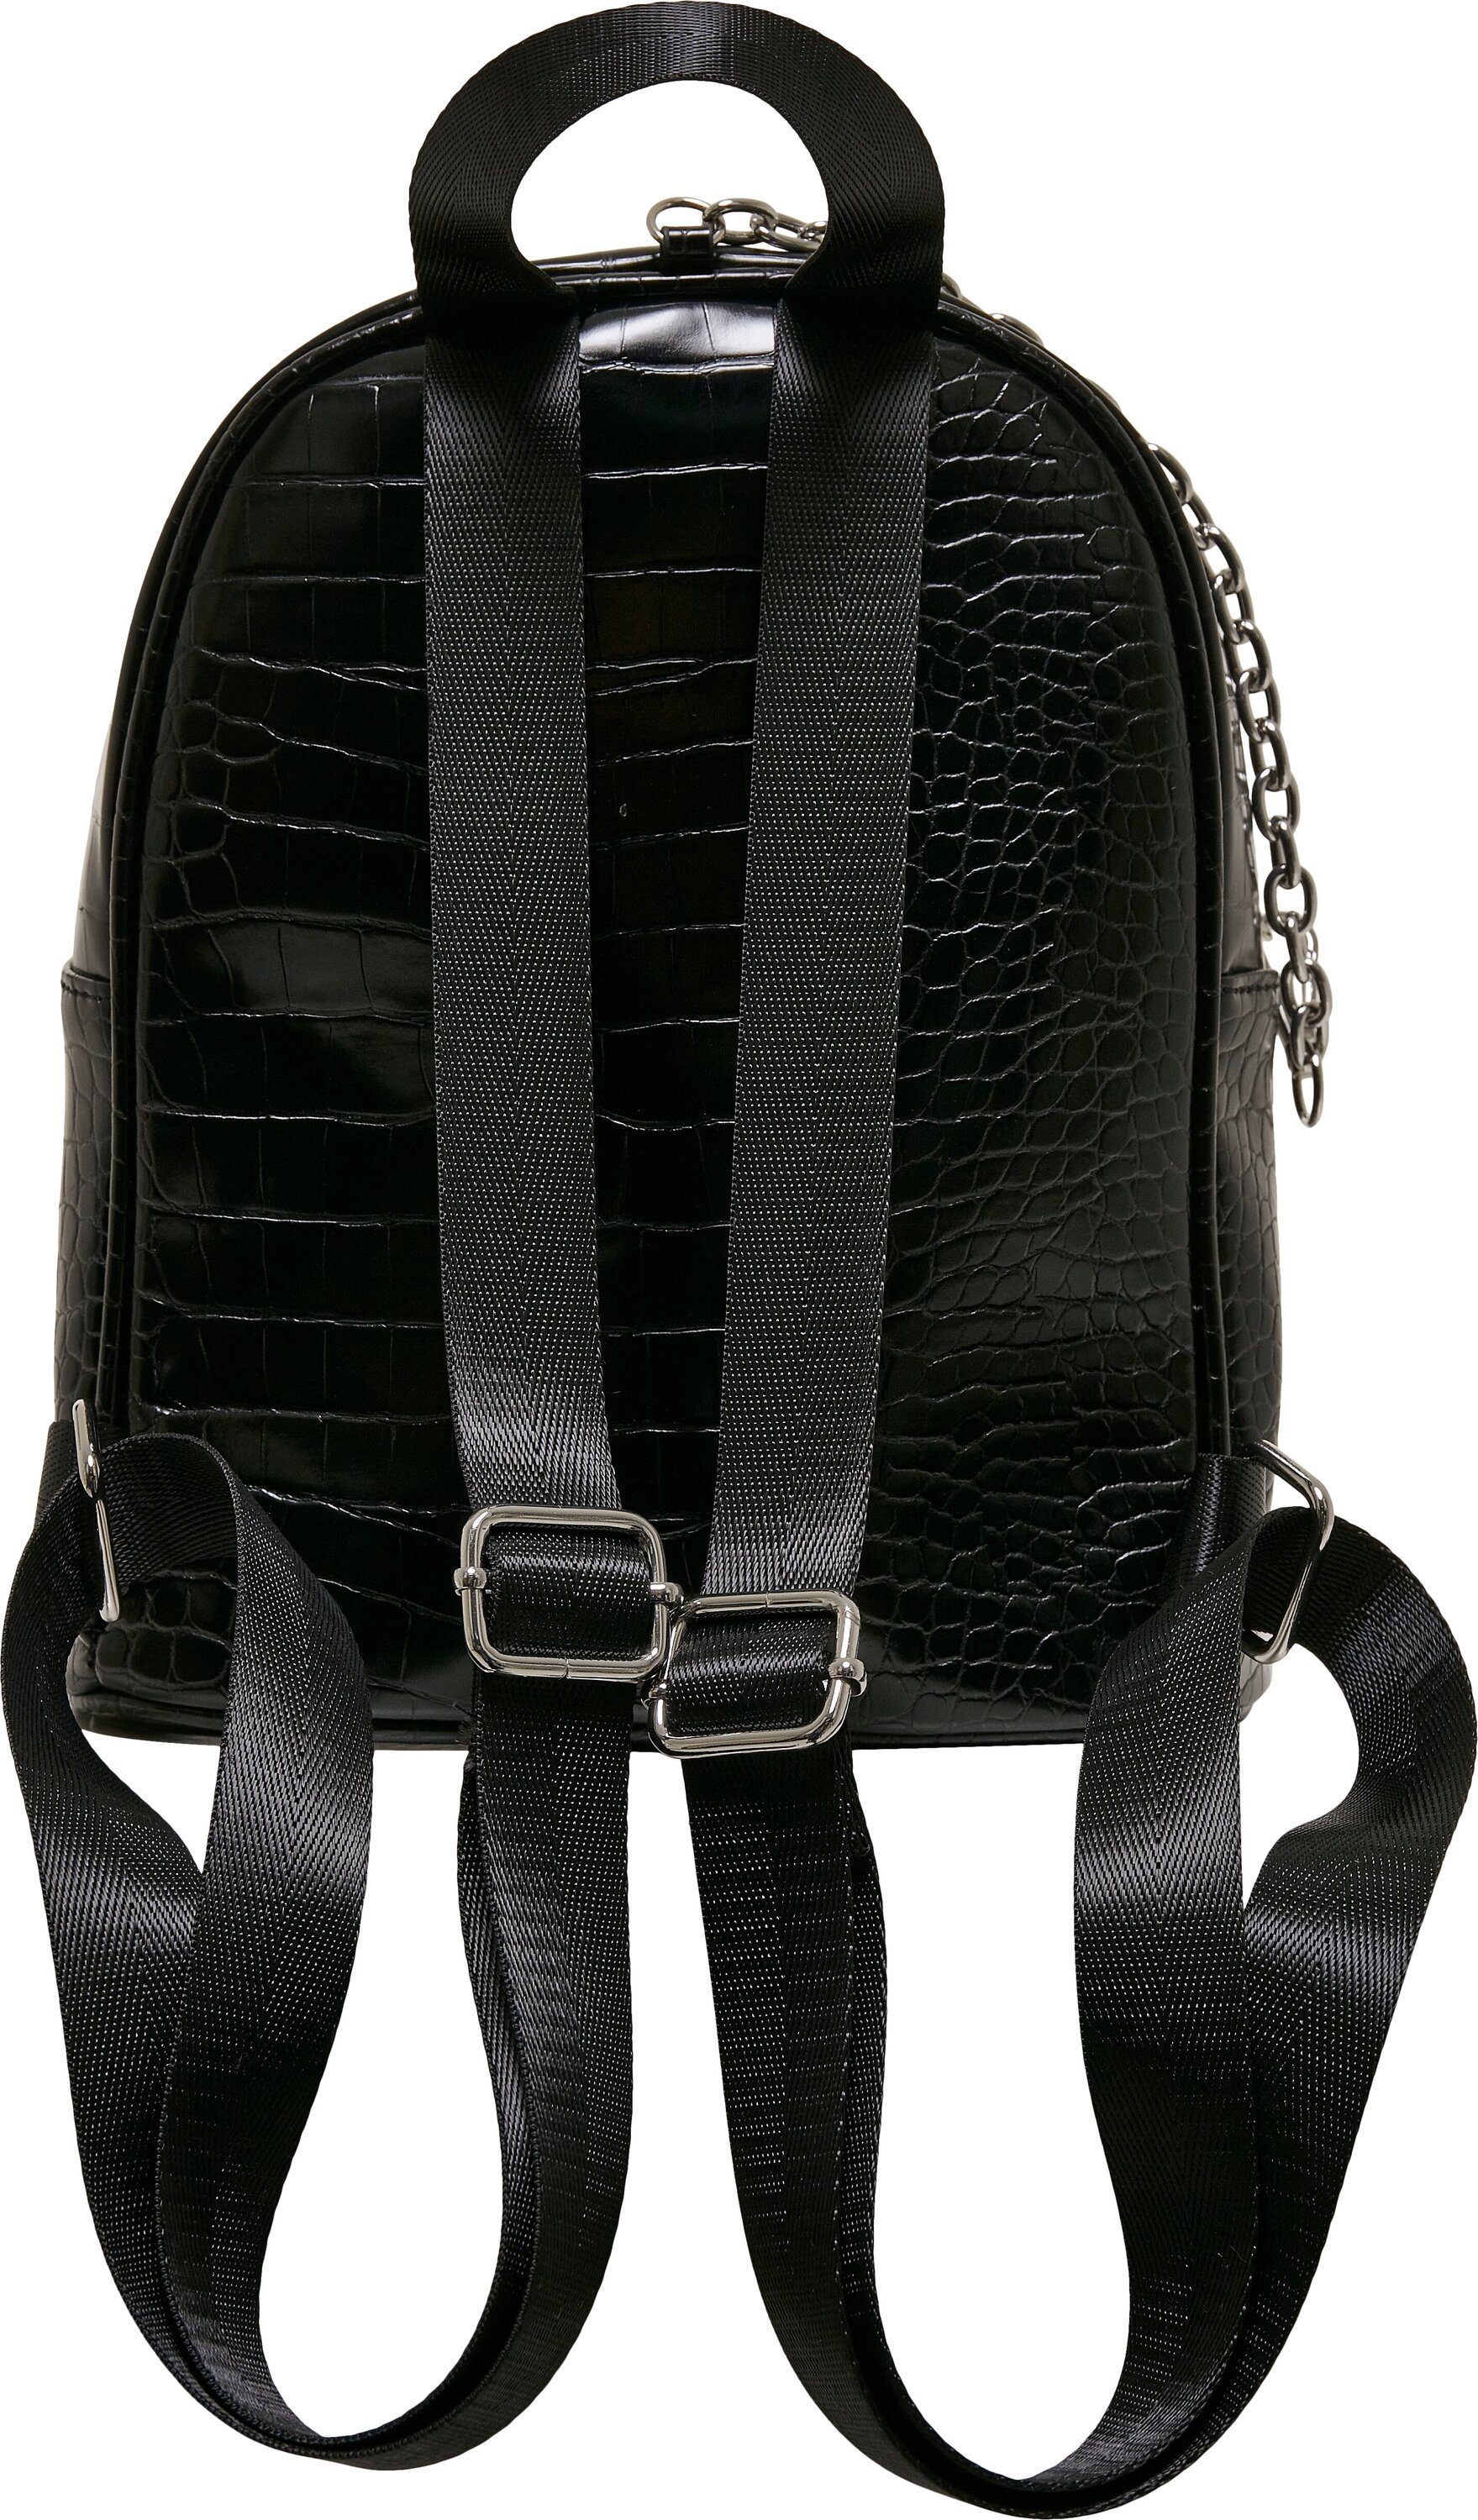 CLASSICS Unisex URBAN Leather Rucksack Backpack Synthetic Croco